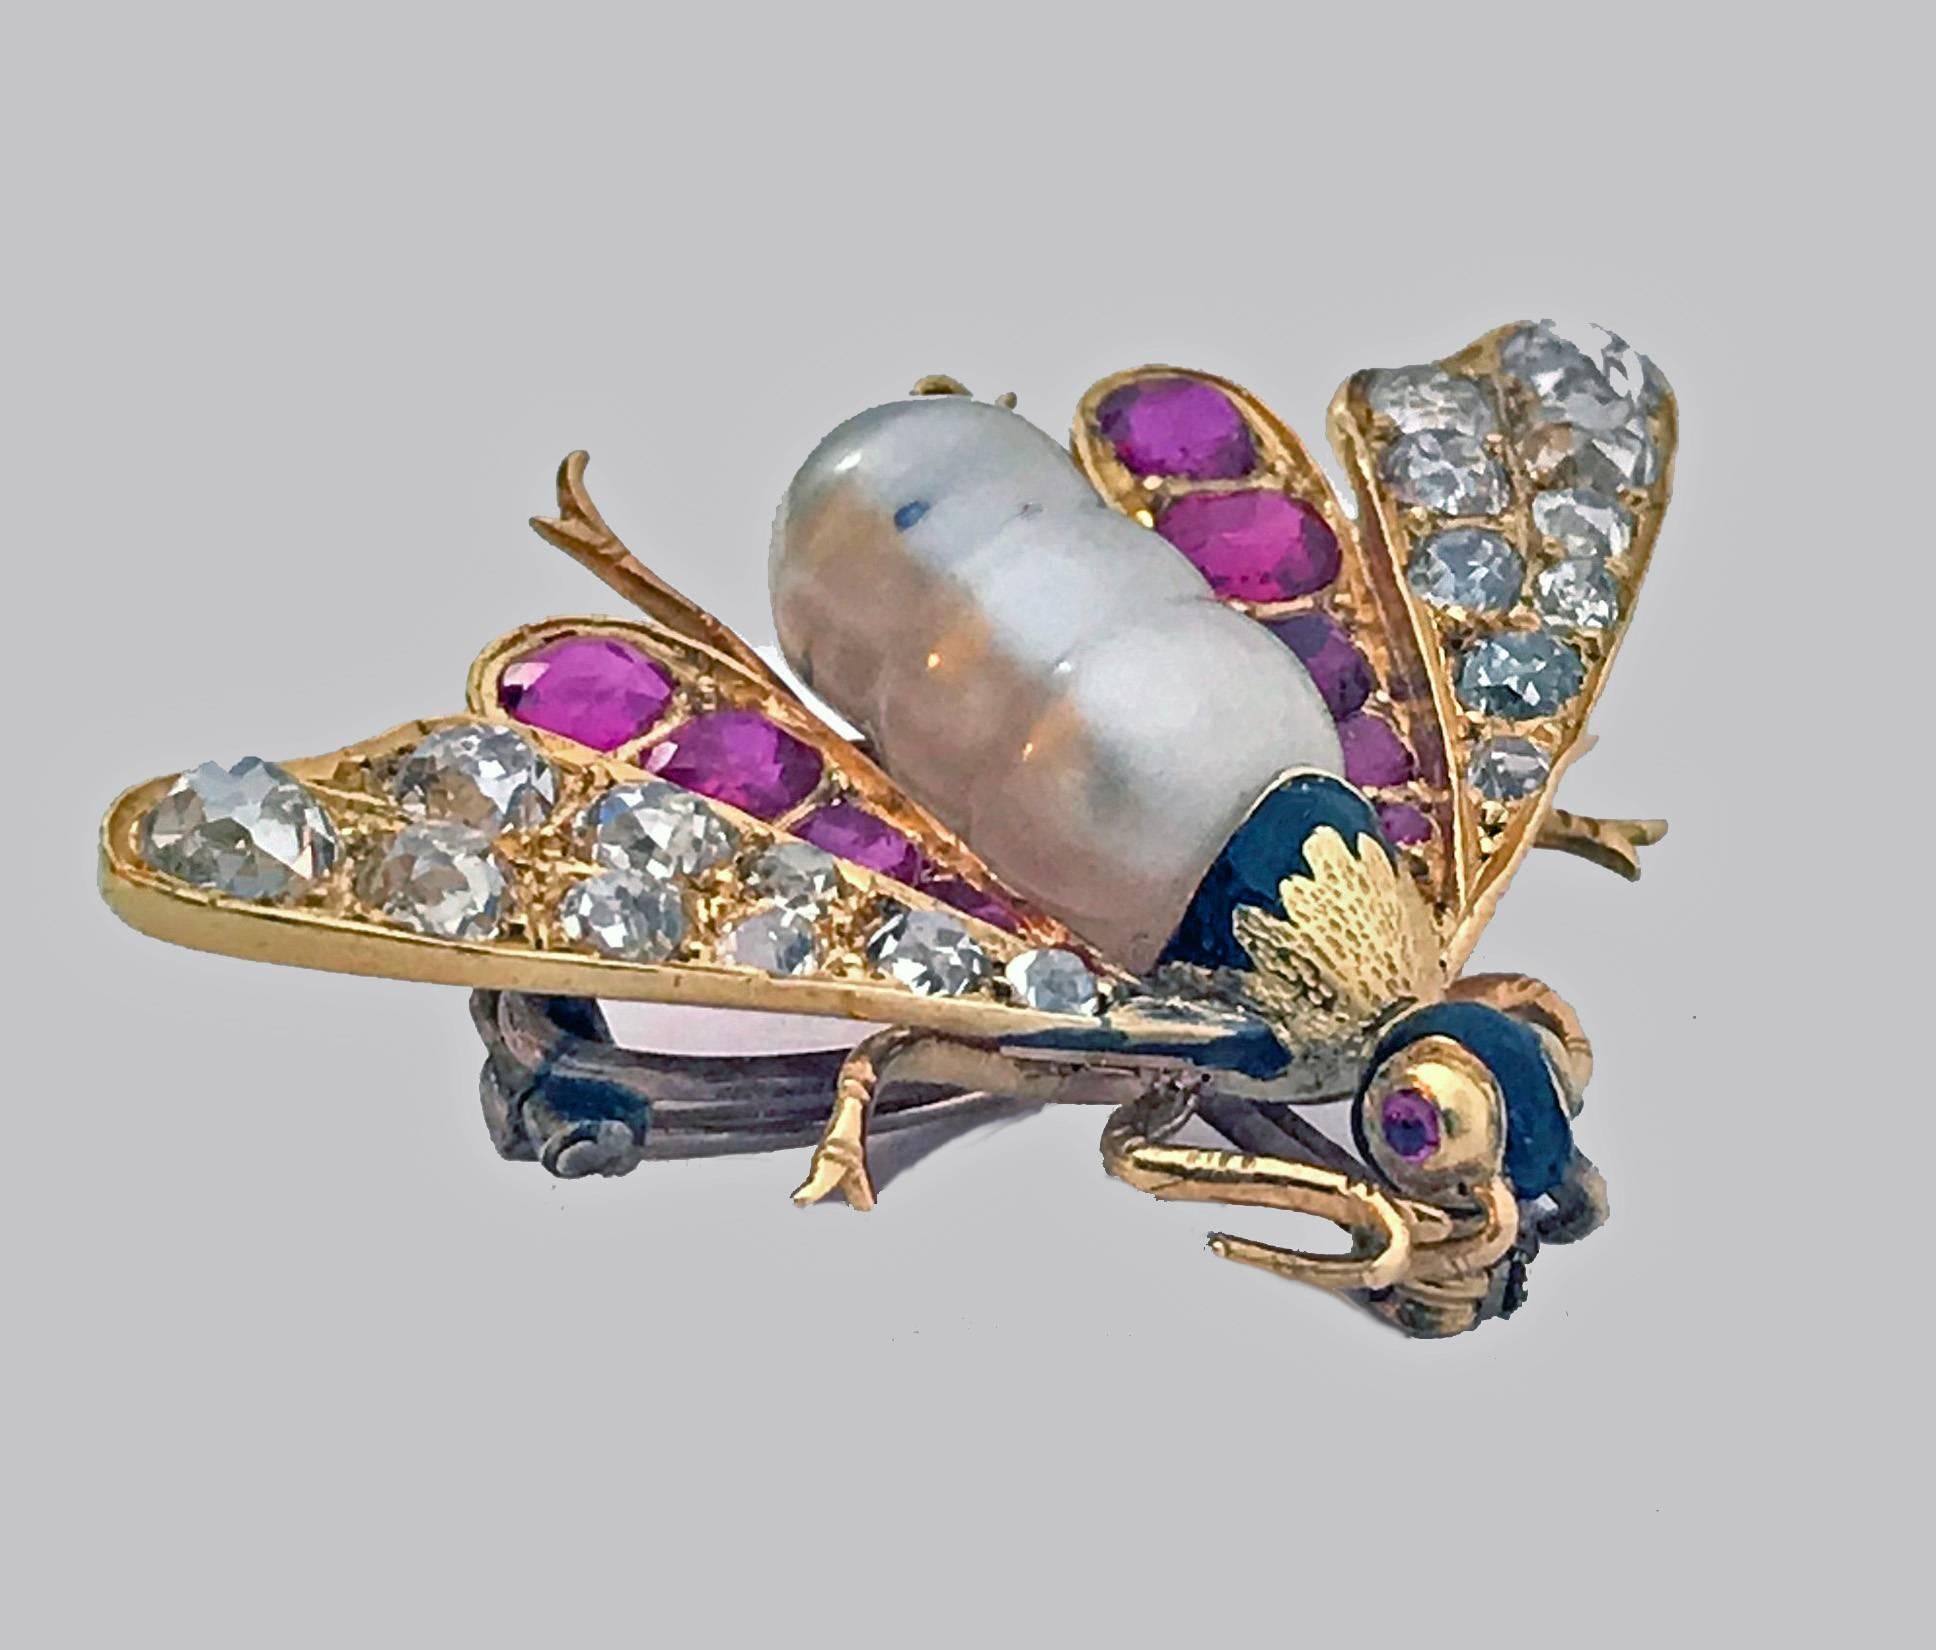 Antique 18K Ruby Diamond and Pearl Bee Brooch Pin, C.1880. The brooch with a baroque pearl body, wings set with 10 cushion purple red rubies and eighteen old mine cut diamonds respectively, the eyes inset with small cabochon rubies, the head with